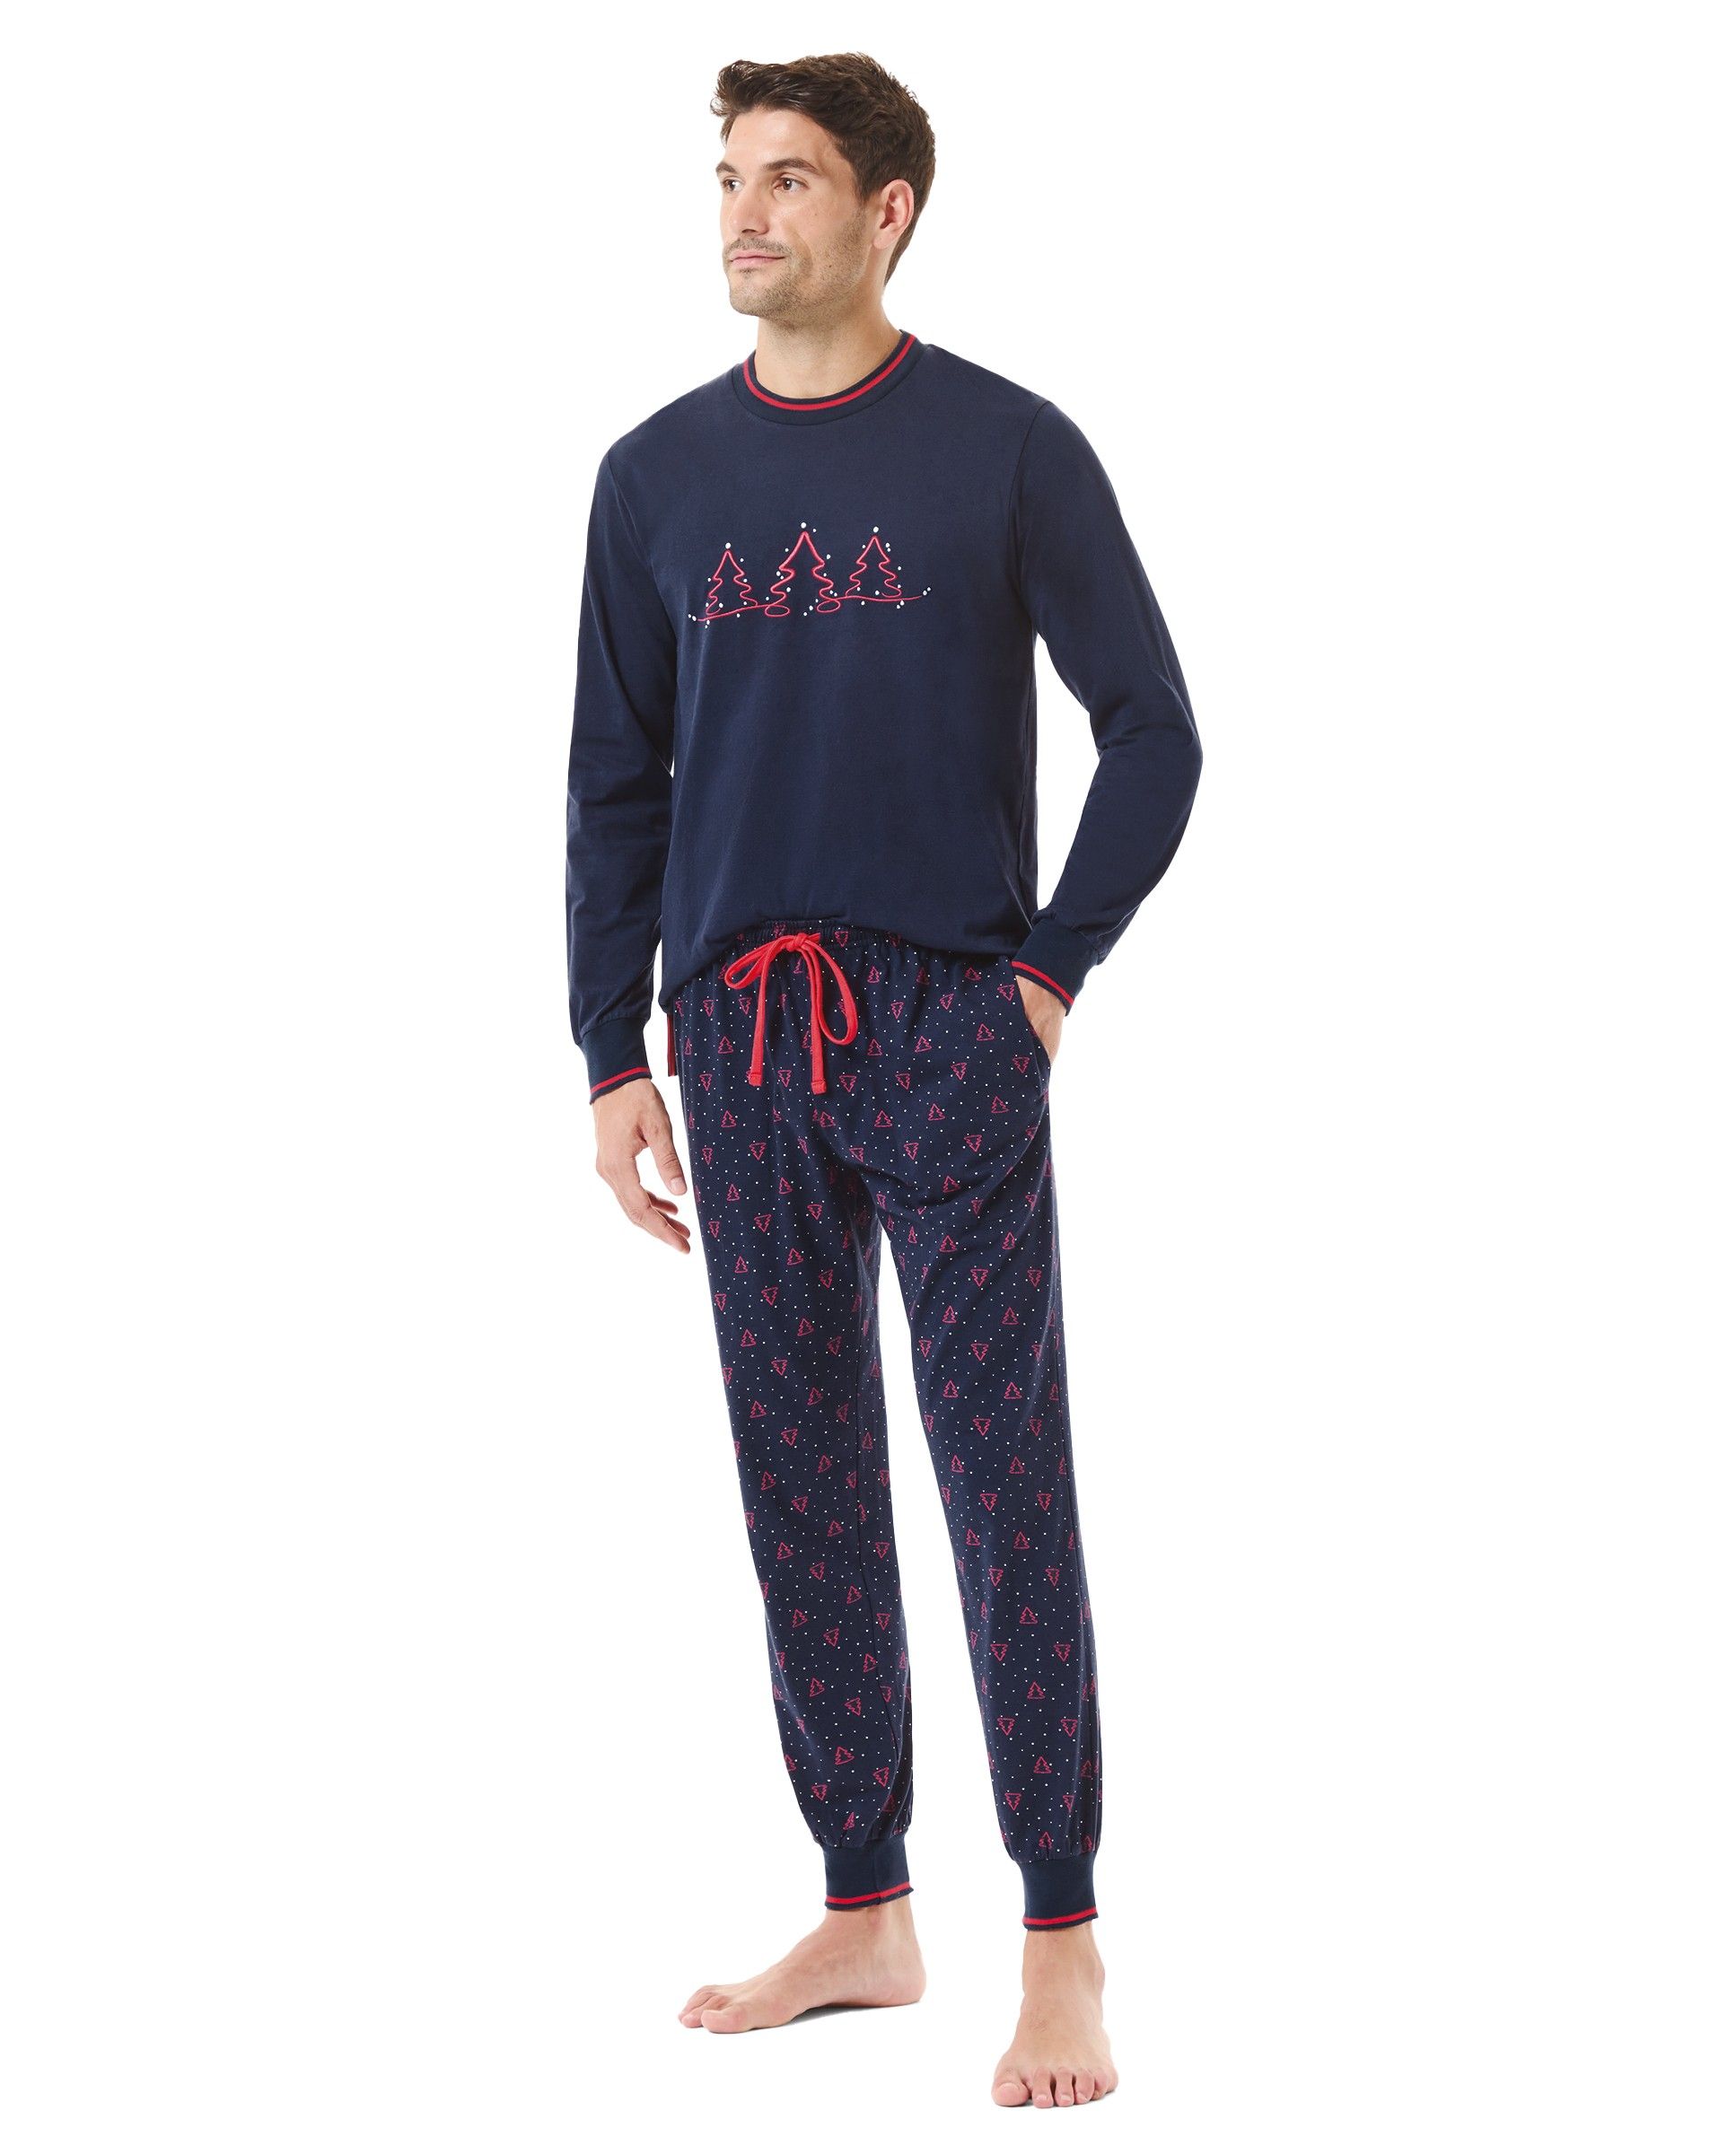 Men's long-sleeved pyjamas with Christmas motifs, round-necked jacket with embroidery and trousers with pockets.